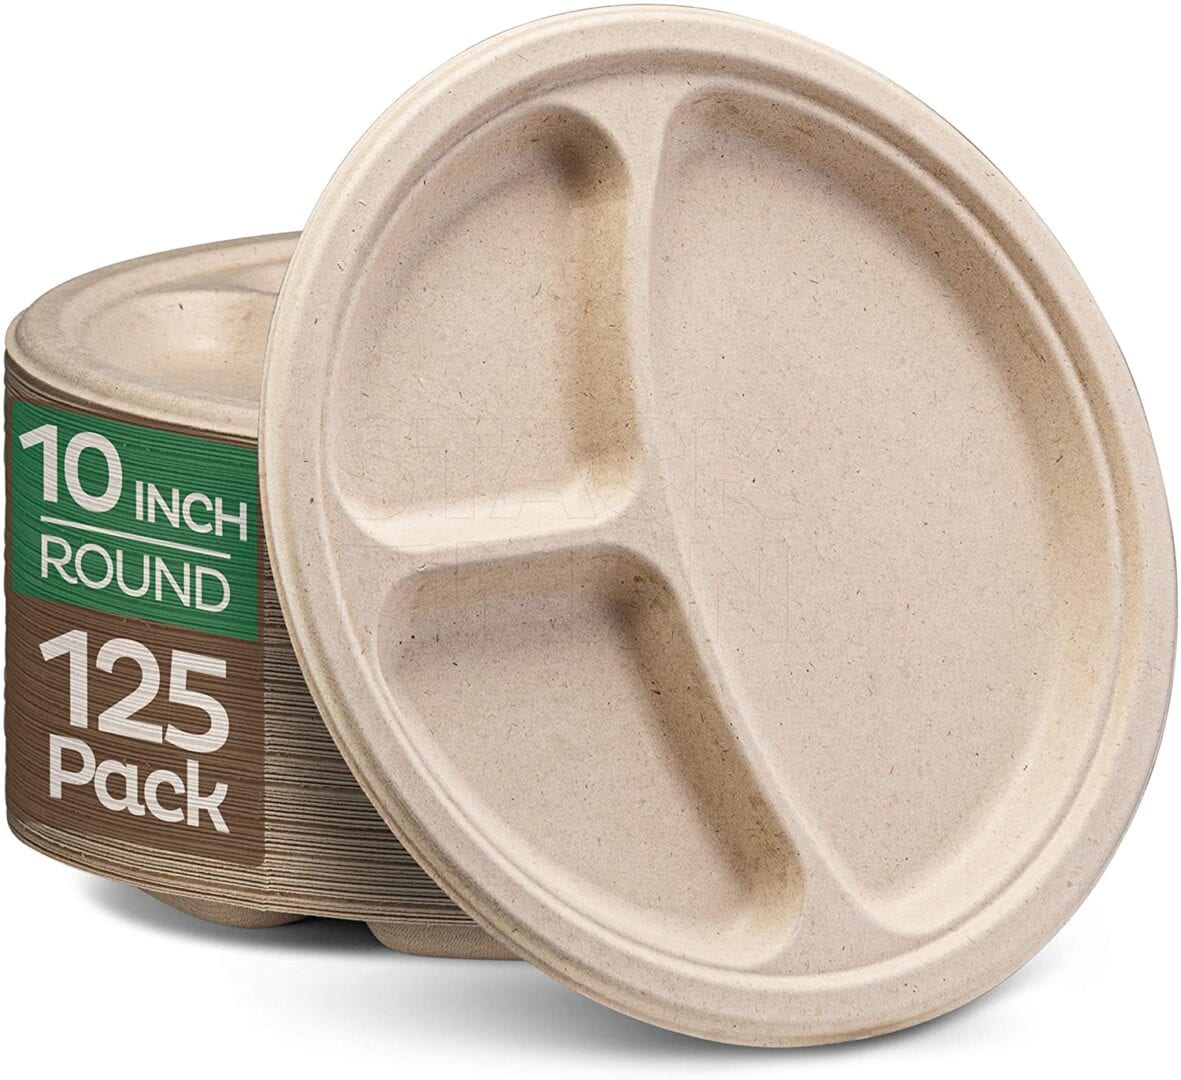 100% Compostable Paper Plates [10 inch - 125-Pack] 3 Compartment Disposable  Plates Heavy-Duty Quality, Natural Bagasse Eco-Friendly Made of Sugar Cane  & Wheat Straw Fibers, 10 Biodegradable Plates - A World Of Deals